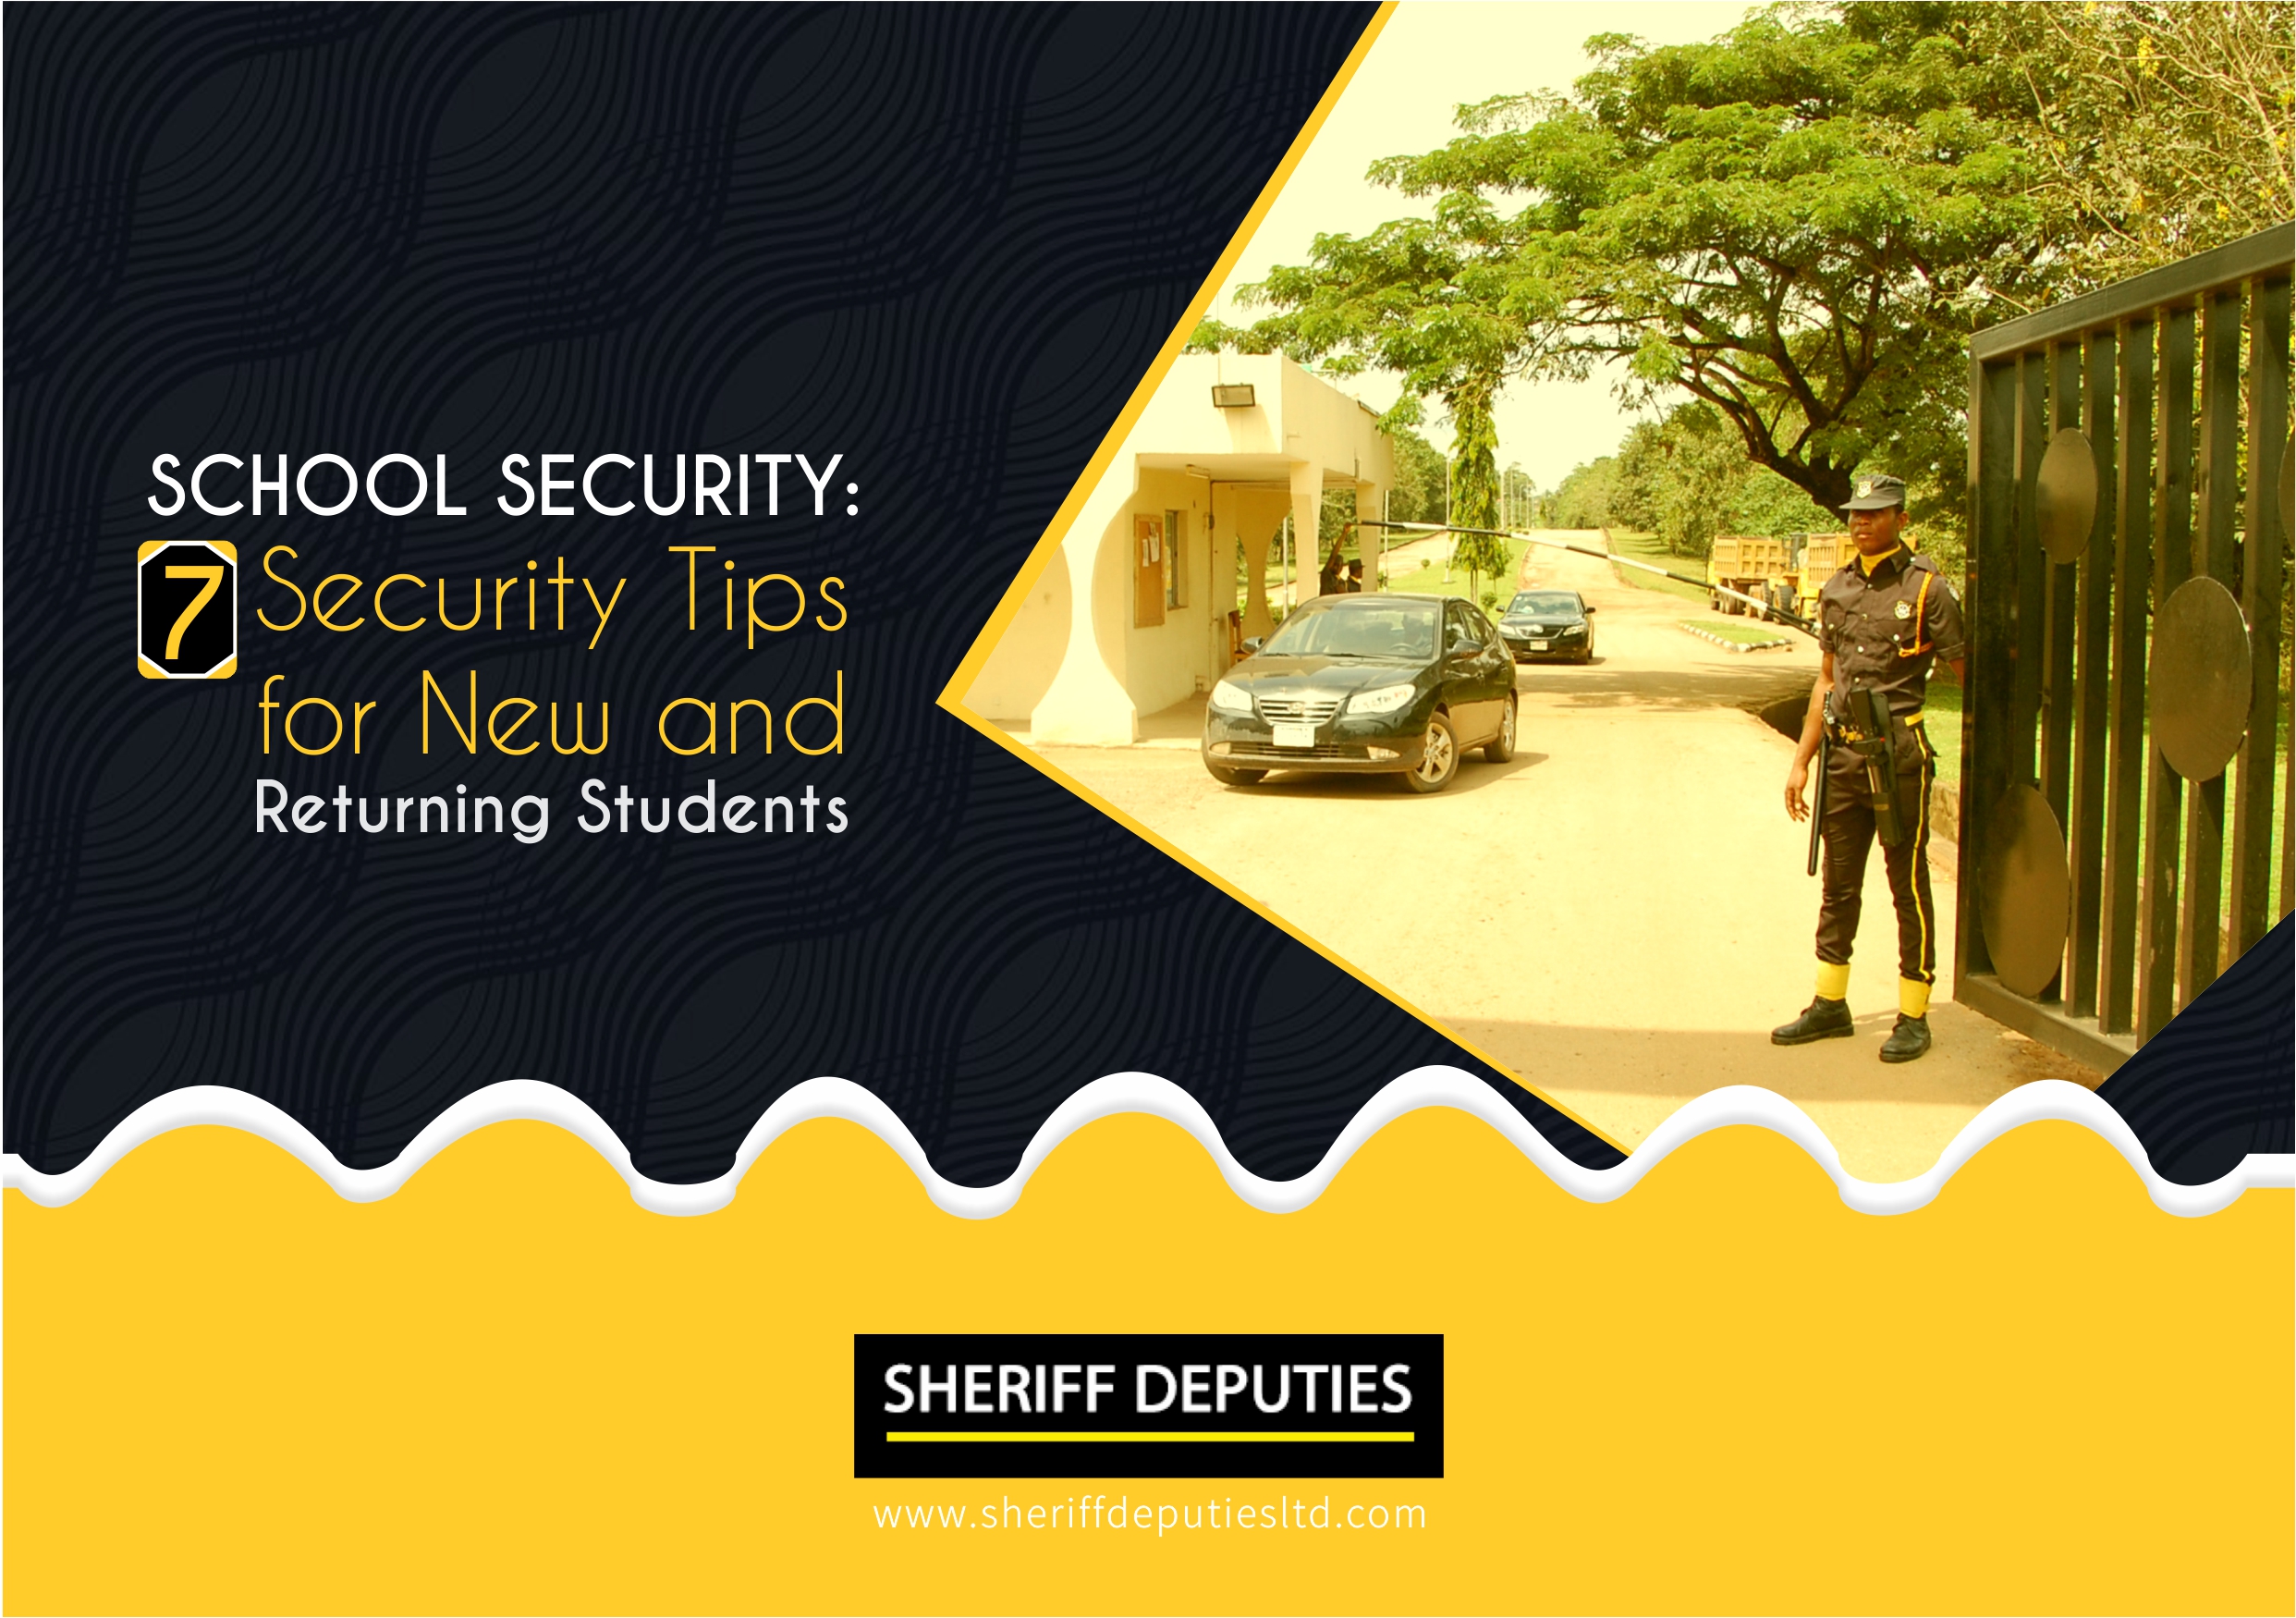 SCHOOL SECURITY:7 Security Tips for New and Returning Students